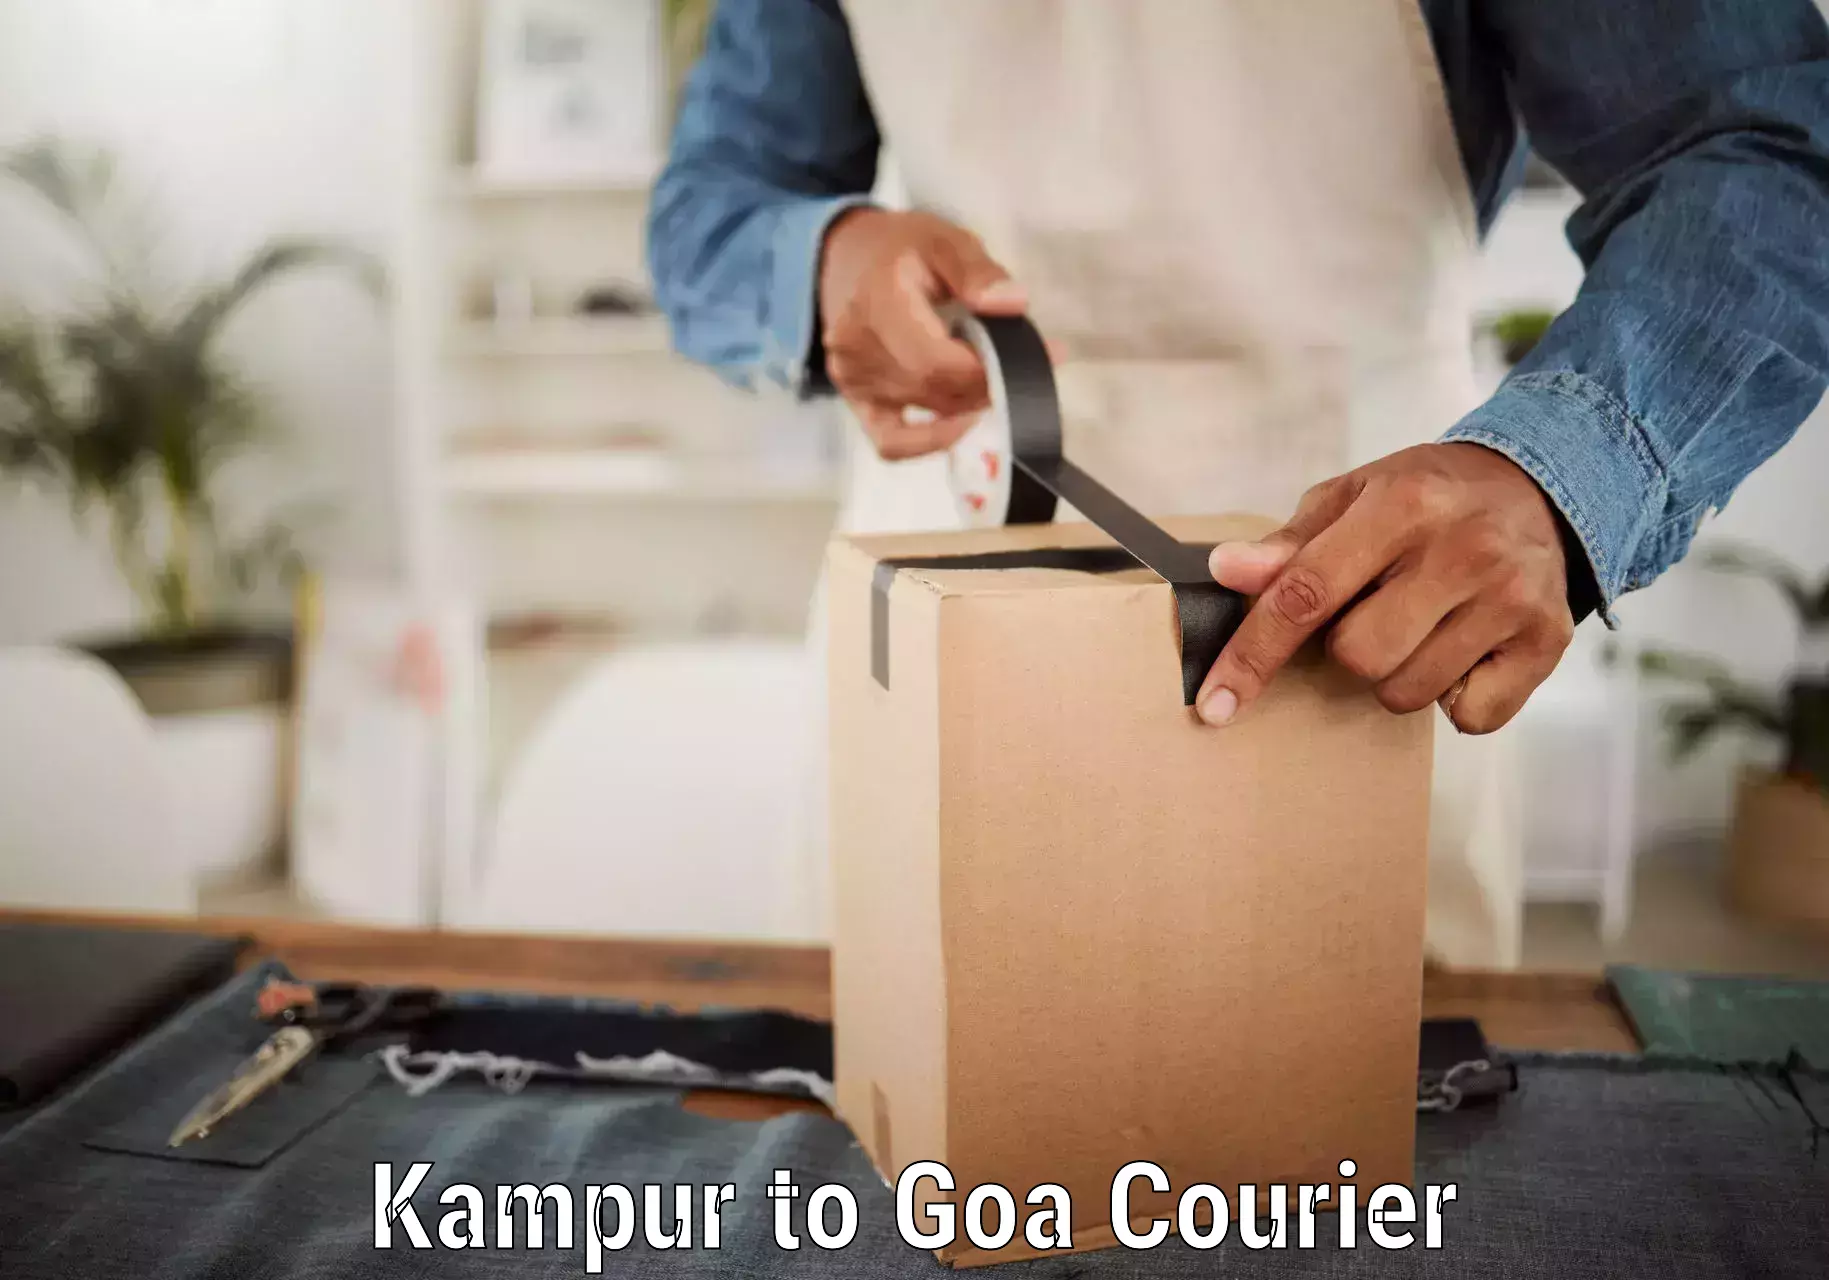 User-friendly delivery service Kampur to Goa